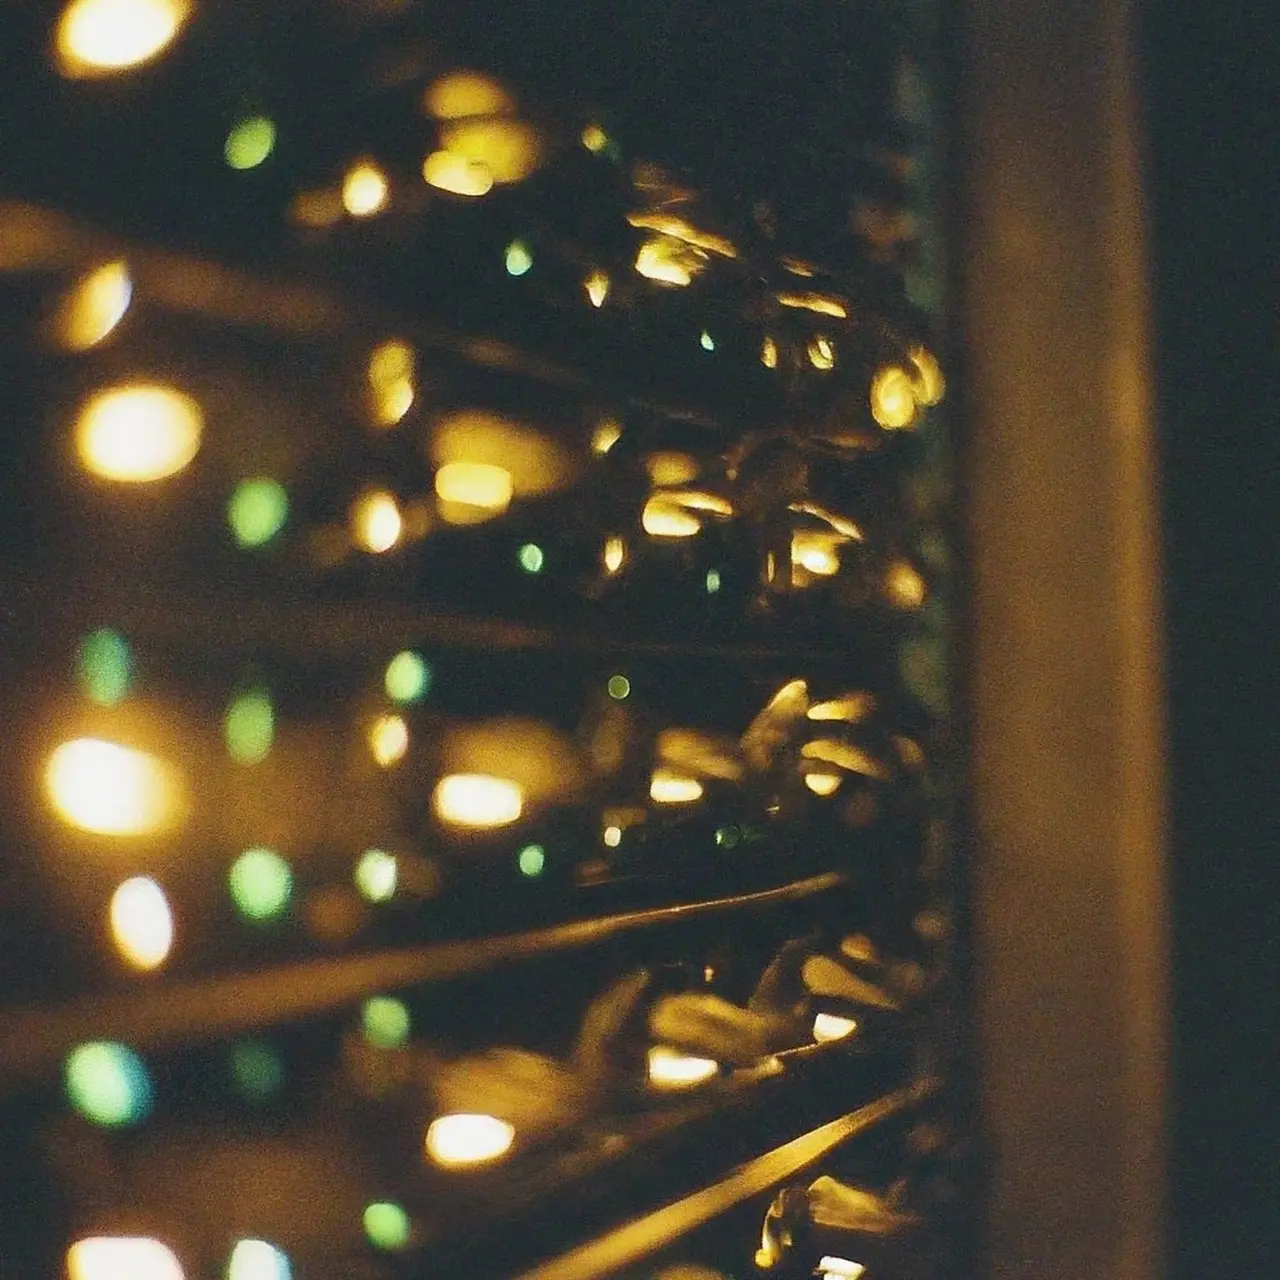 A network server rack with glowing lights in a dark room. 35mm stock photo